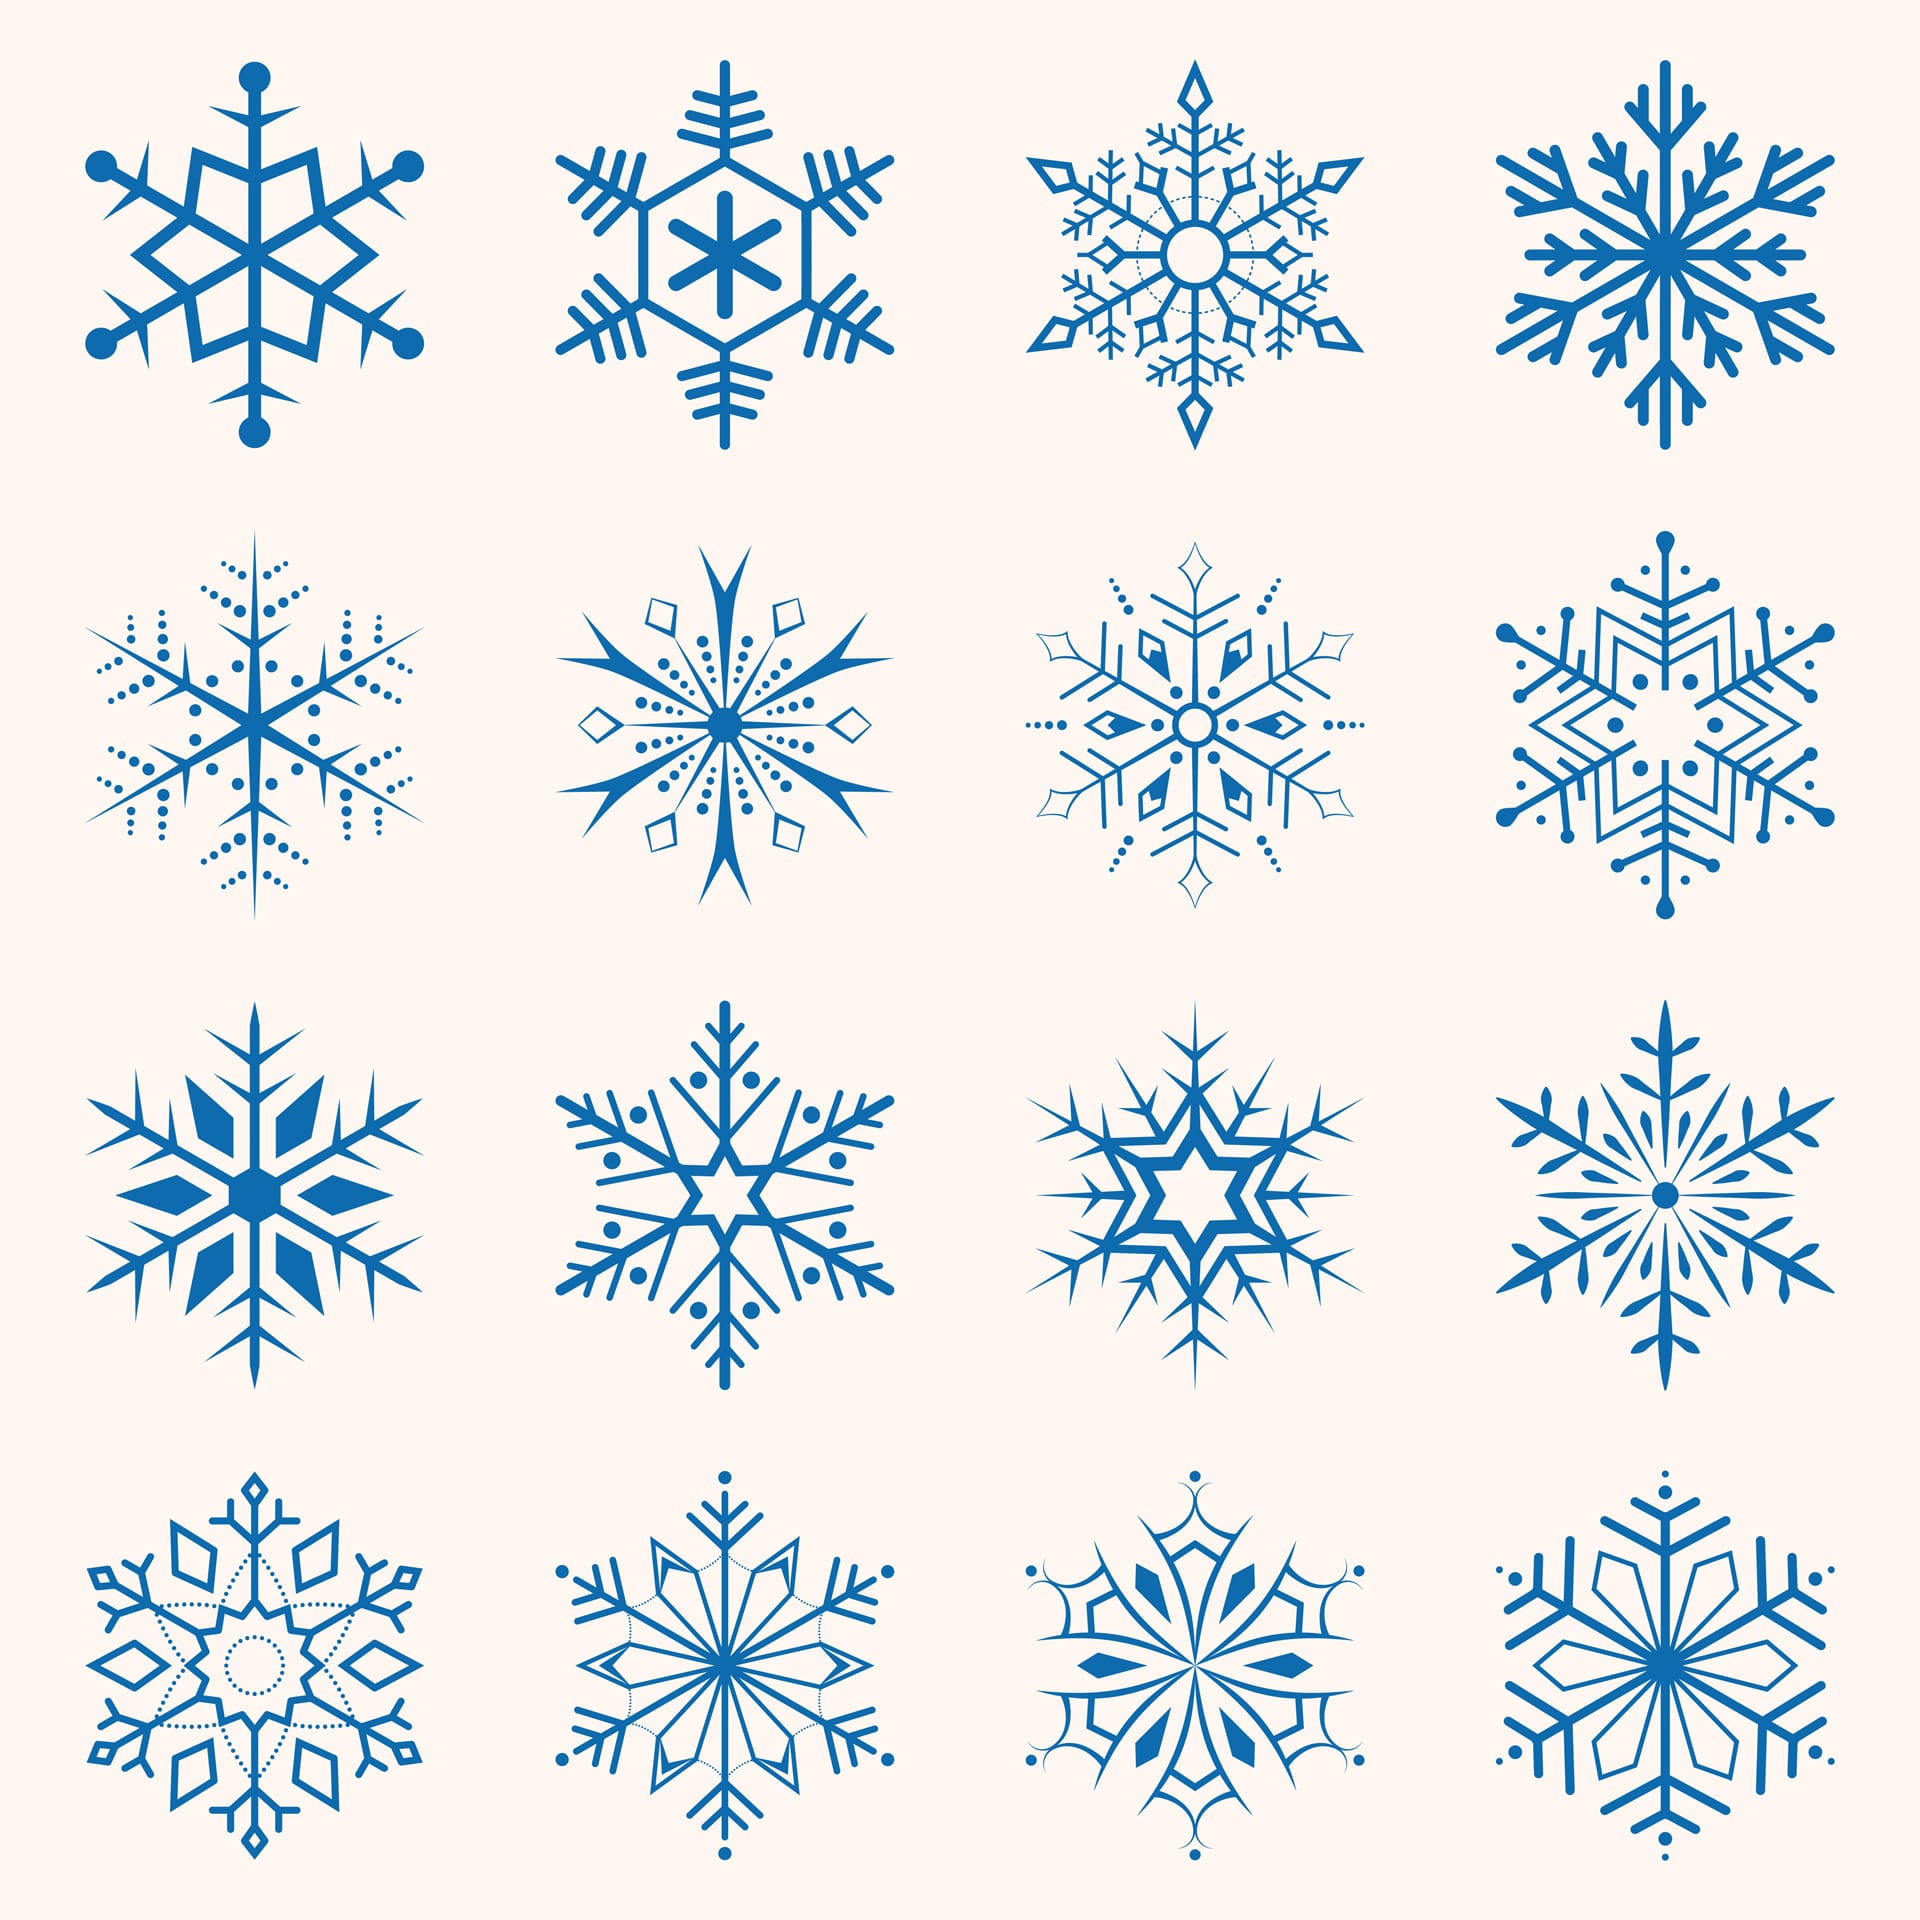 Snowflake clipart collection blue snowflakes